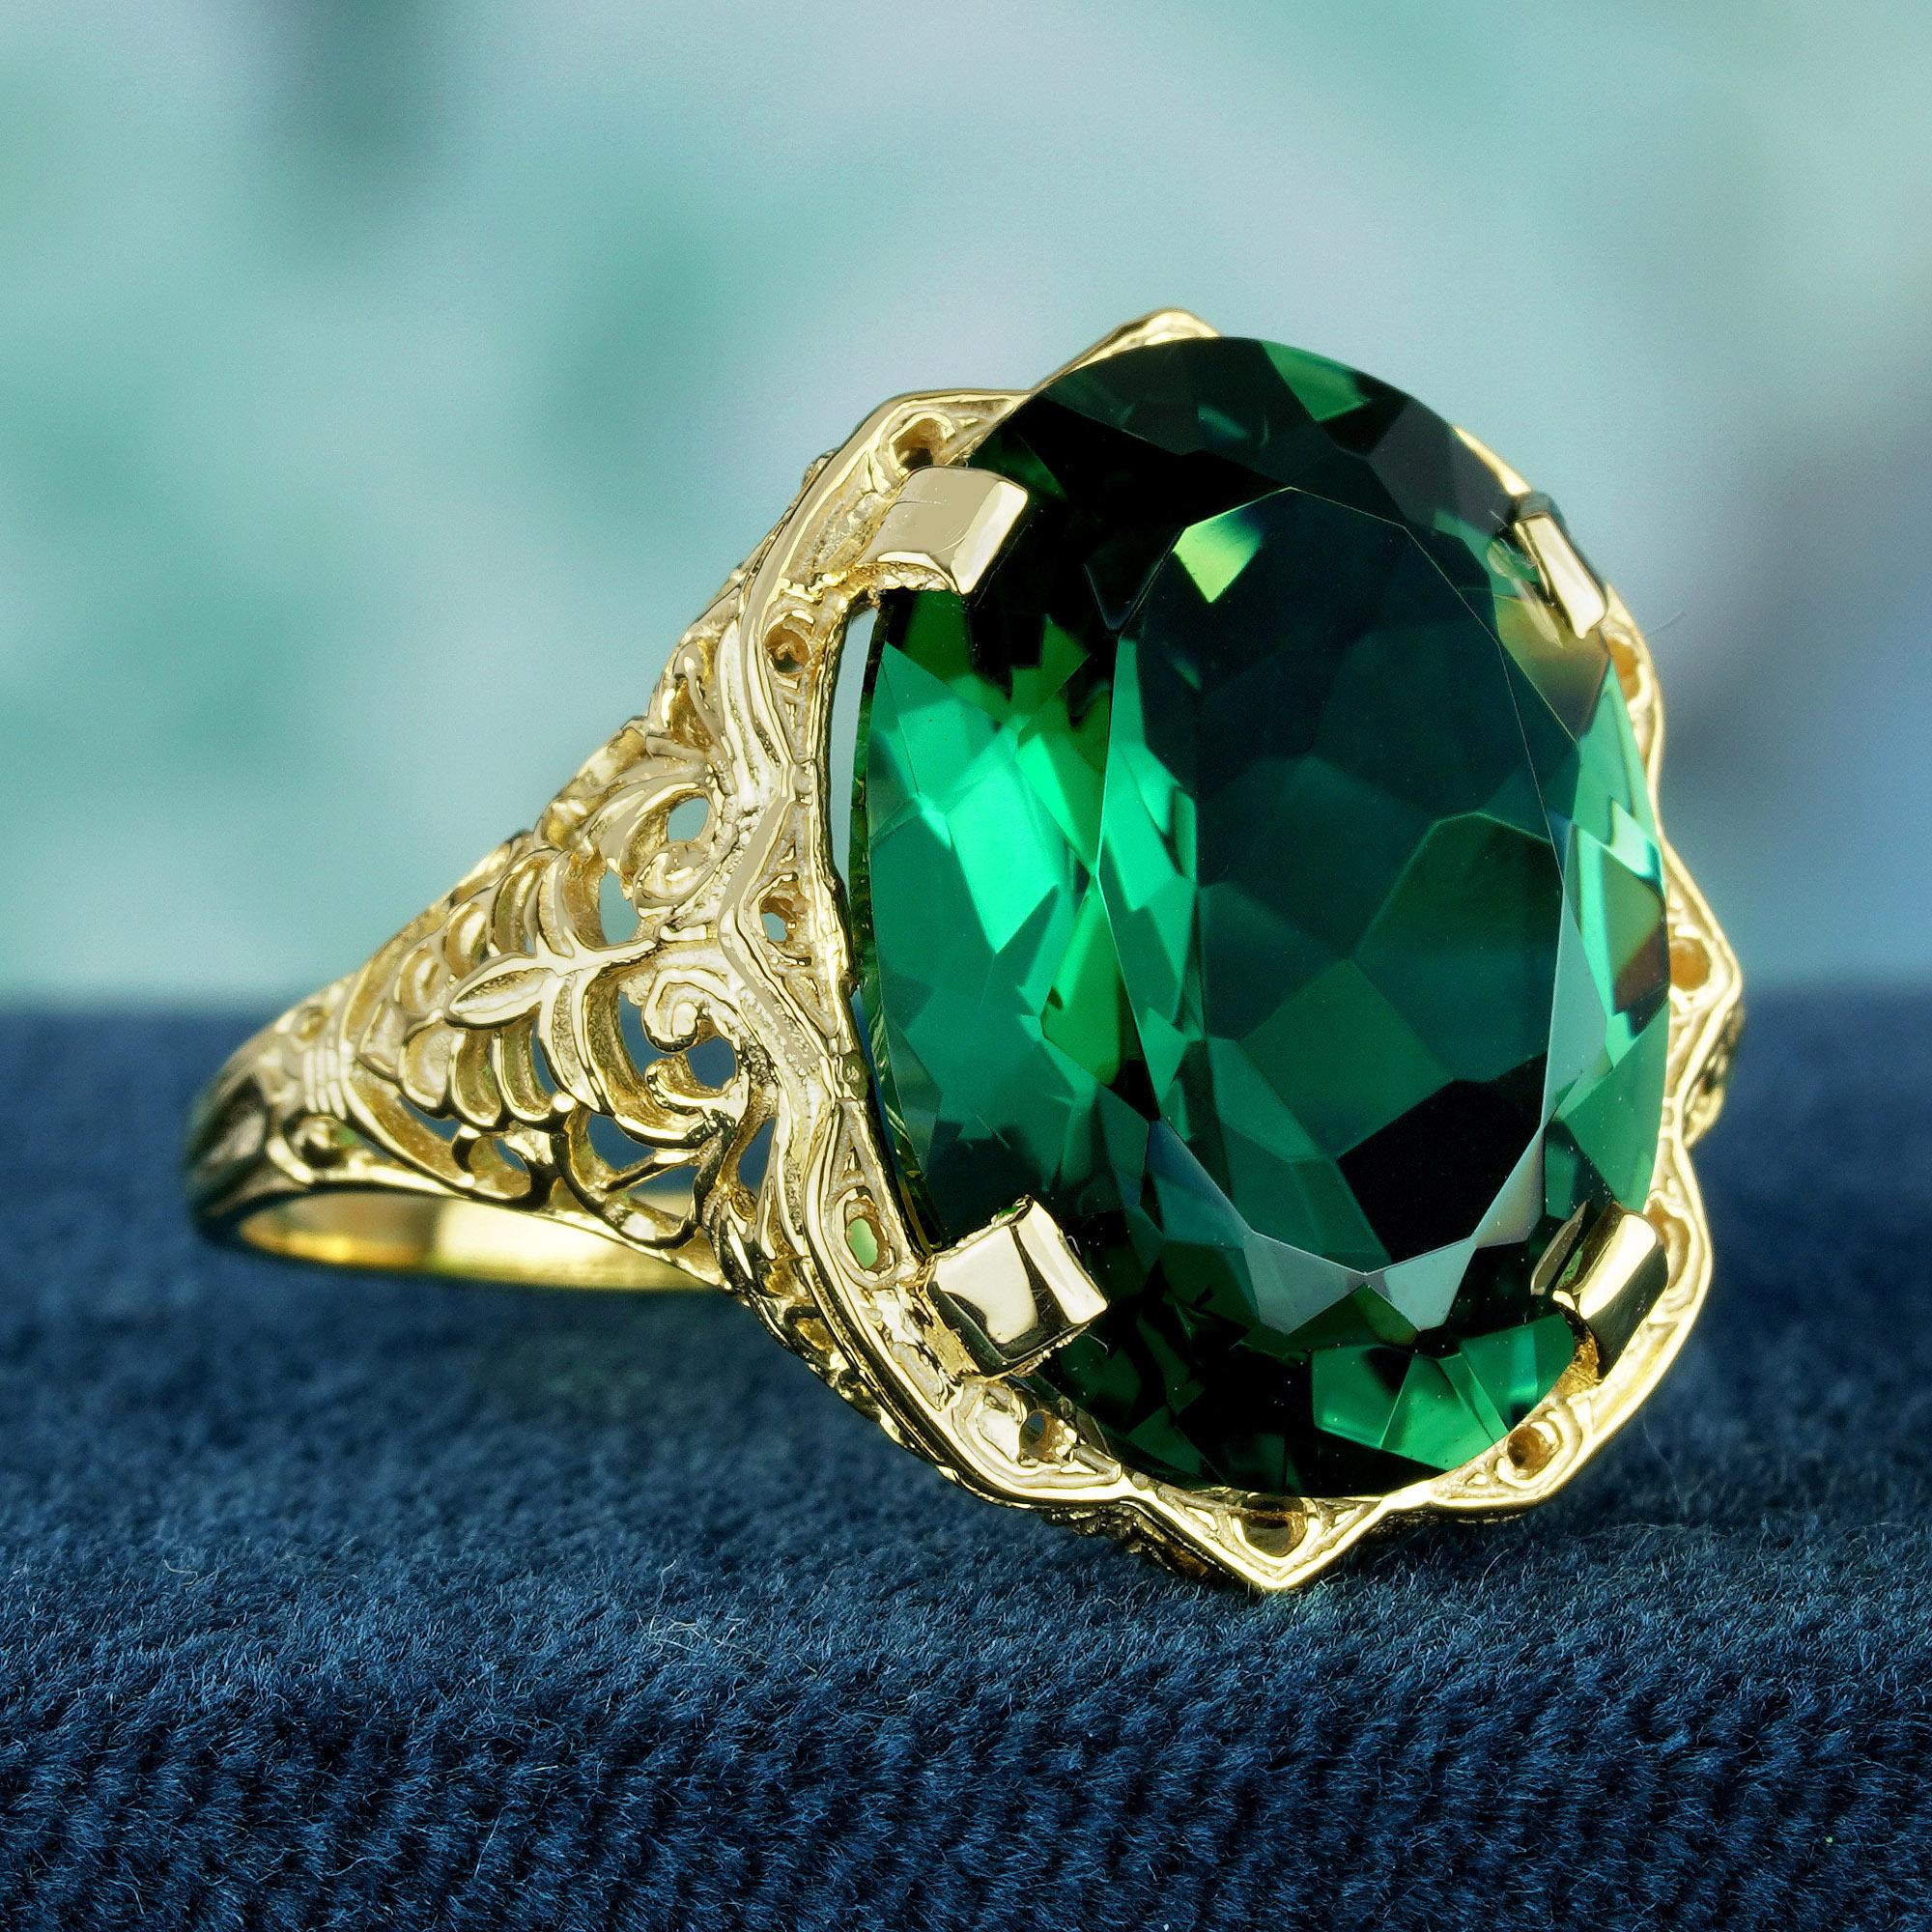 Embrace the allure of vintage glamour with our oval green quartz vintage style ring set in prongs on a delicate yellow gold band with filigree. Exquisitely crafted, its intricate filigree detailing adds a touch of old-world charm to any ensemble.